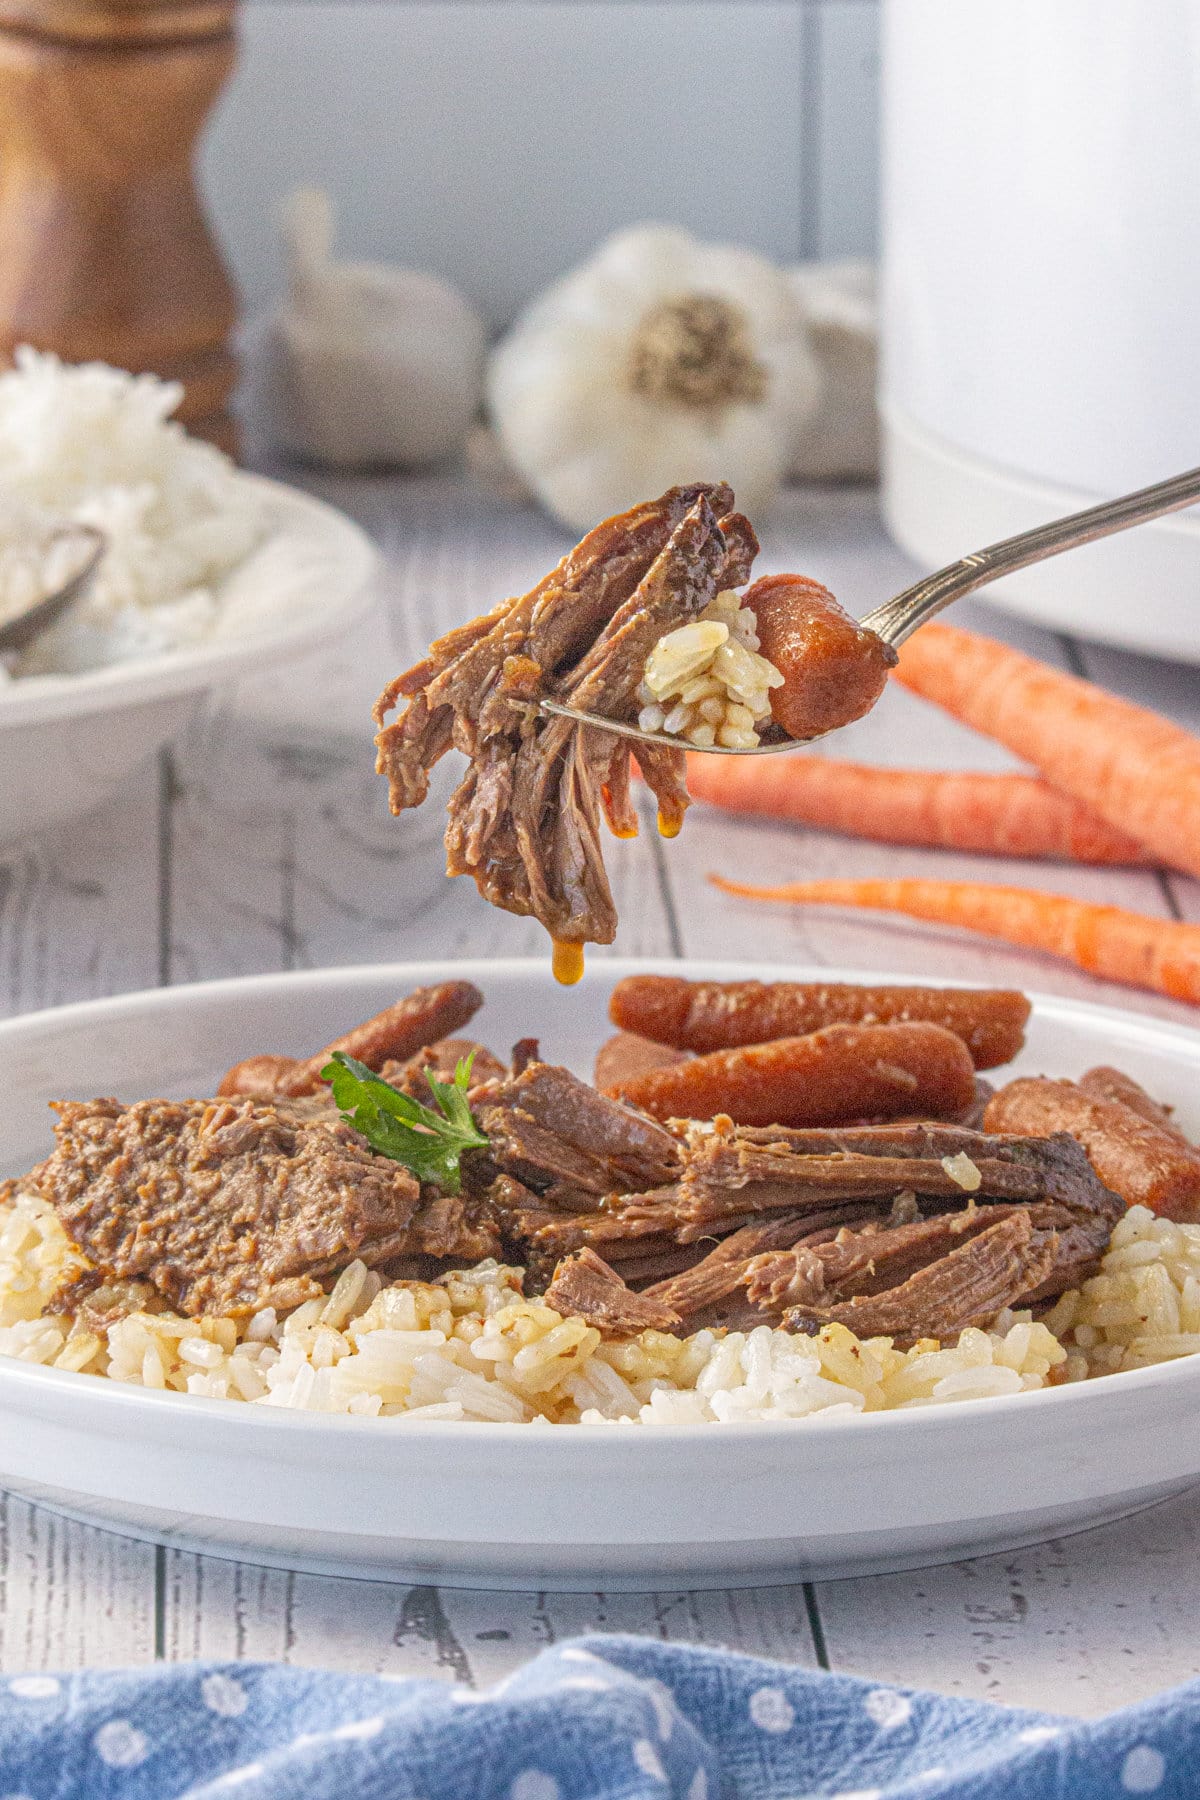 A plate full of rice, rump roast, and carrots, with a fork scooping up a bite.